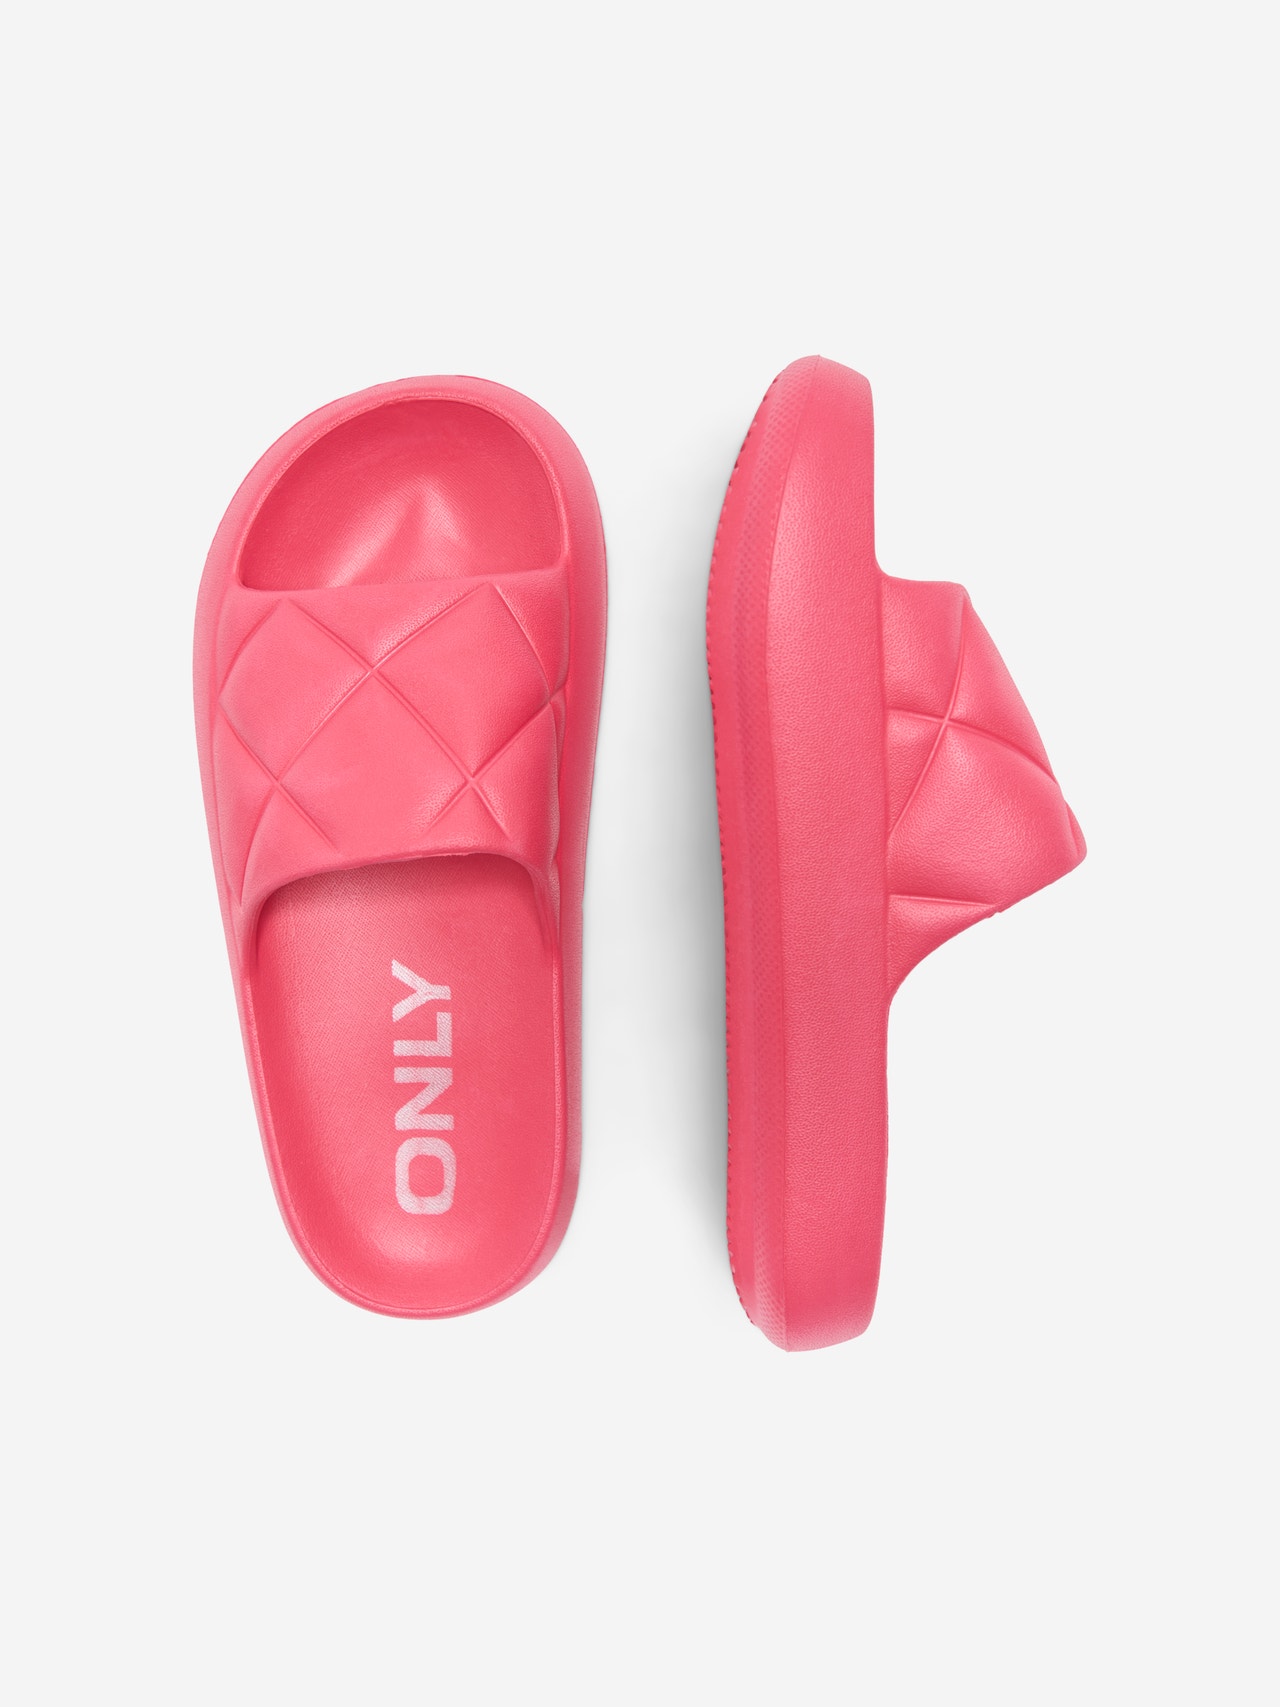 ONLY Rubber Sliders -Pink Glo - 15288145